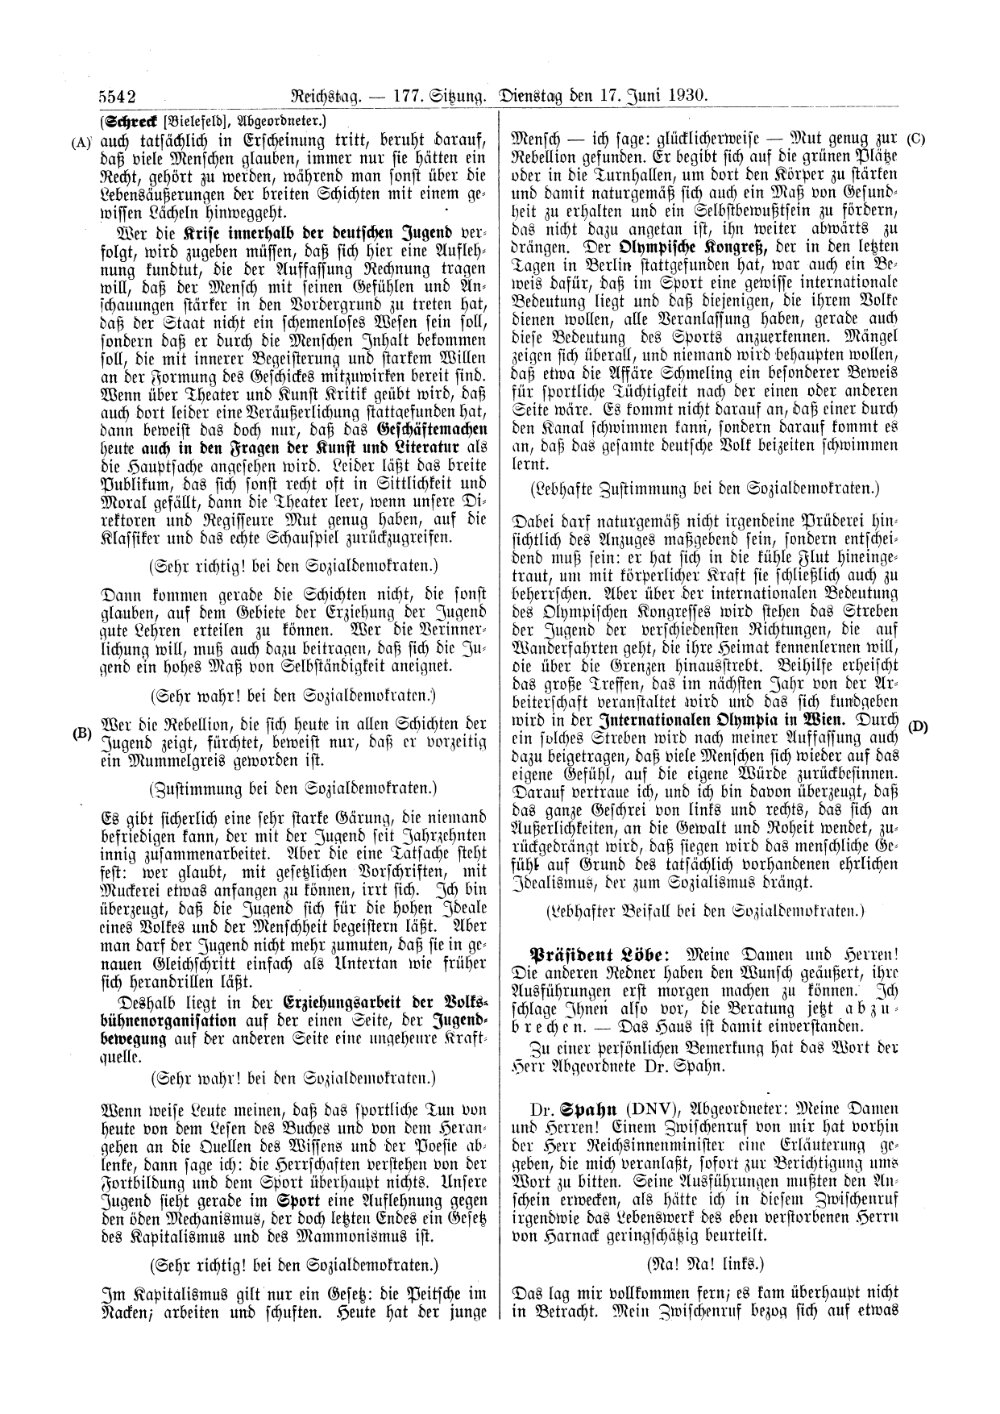 Scan of page 5542